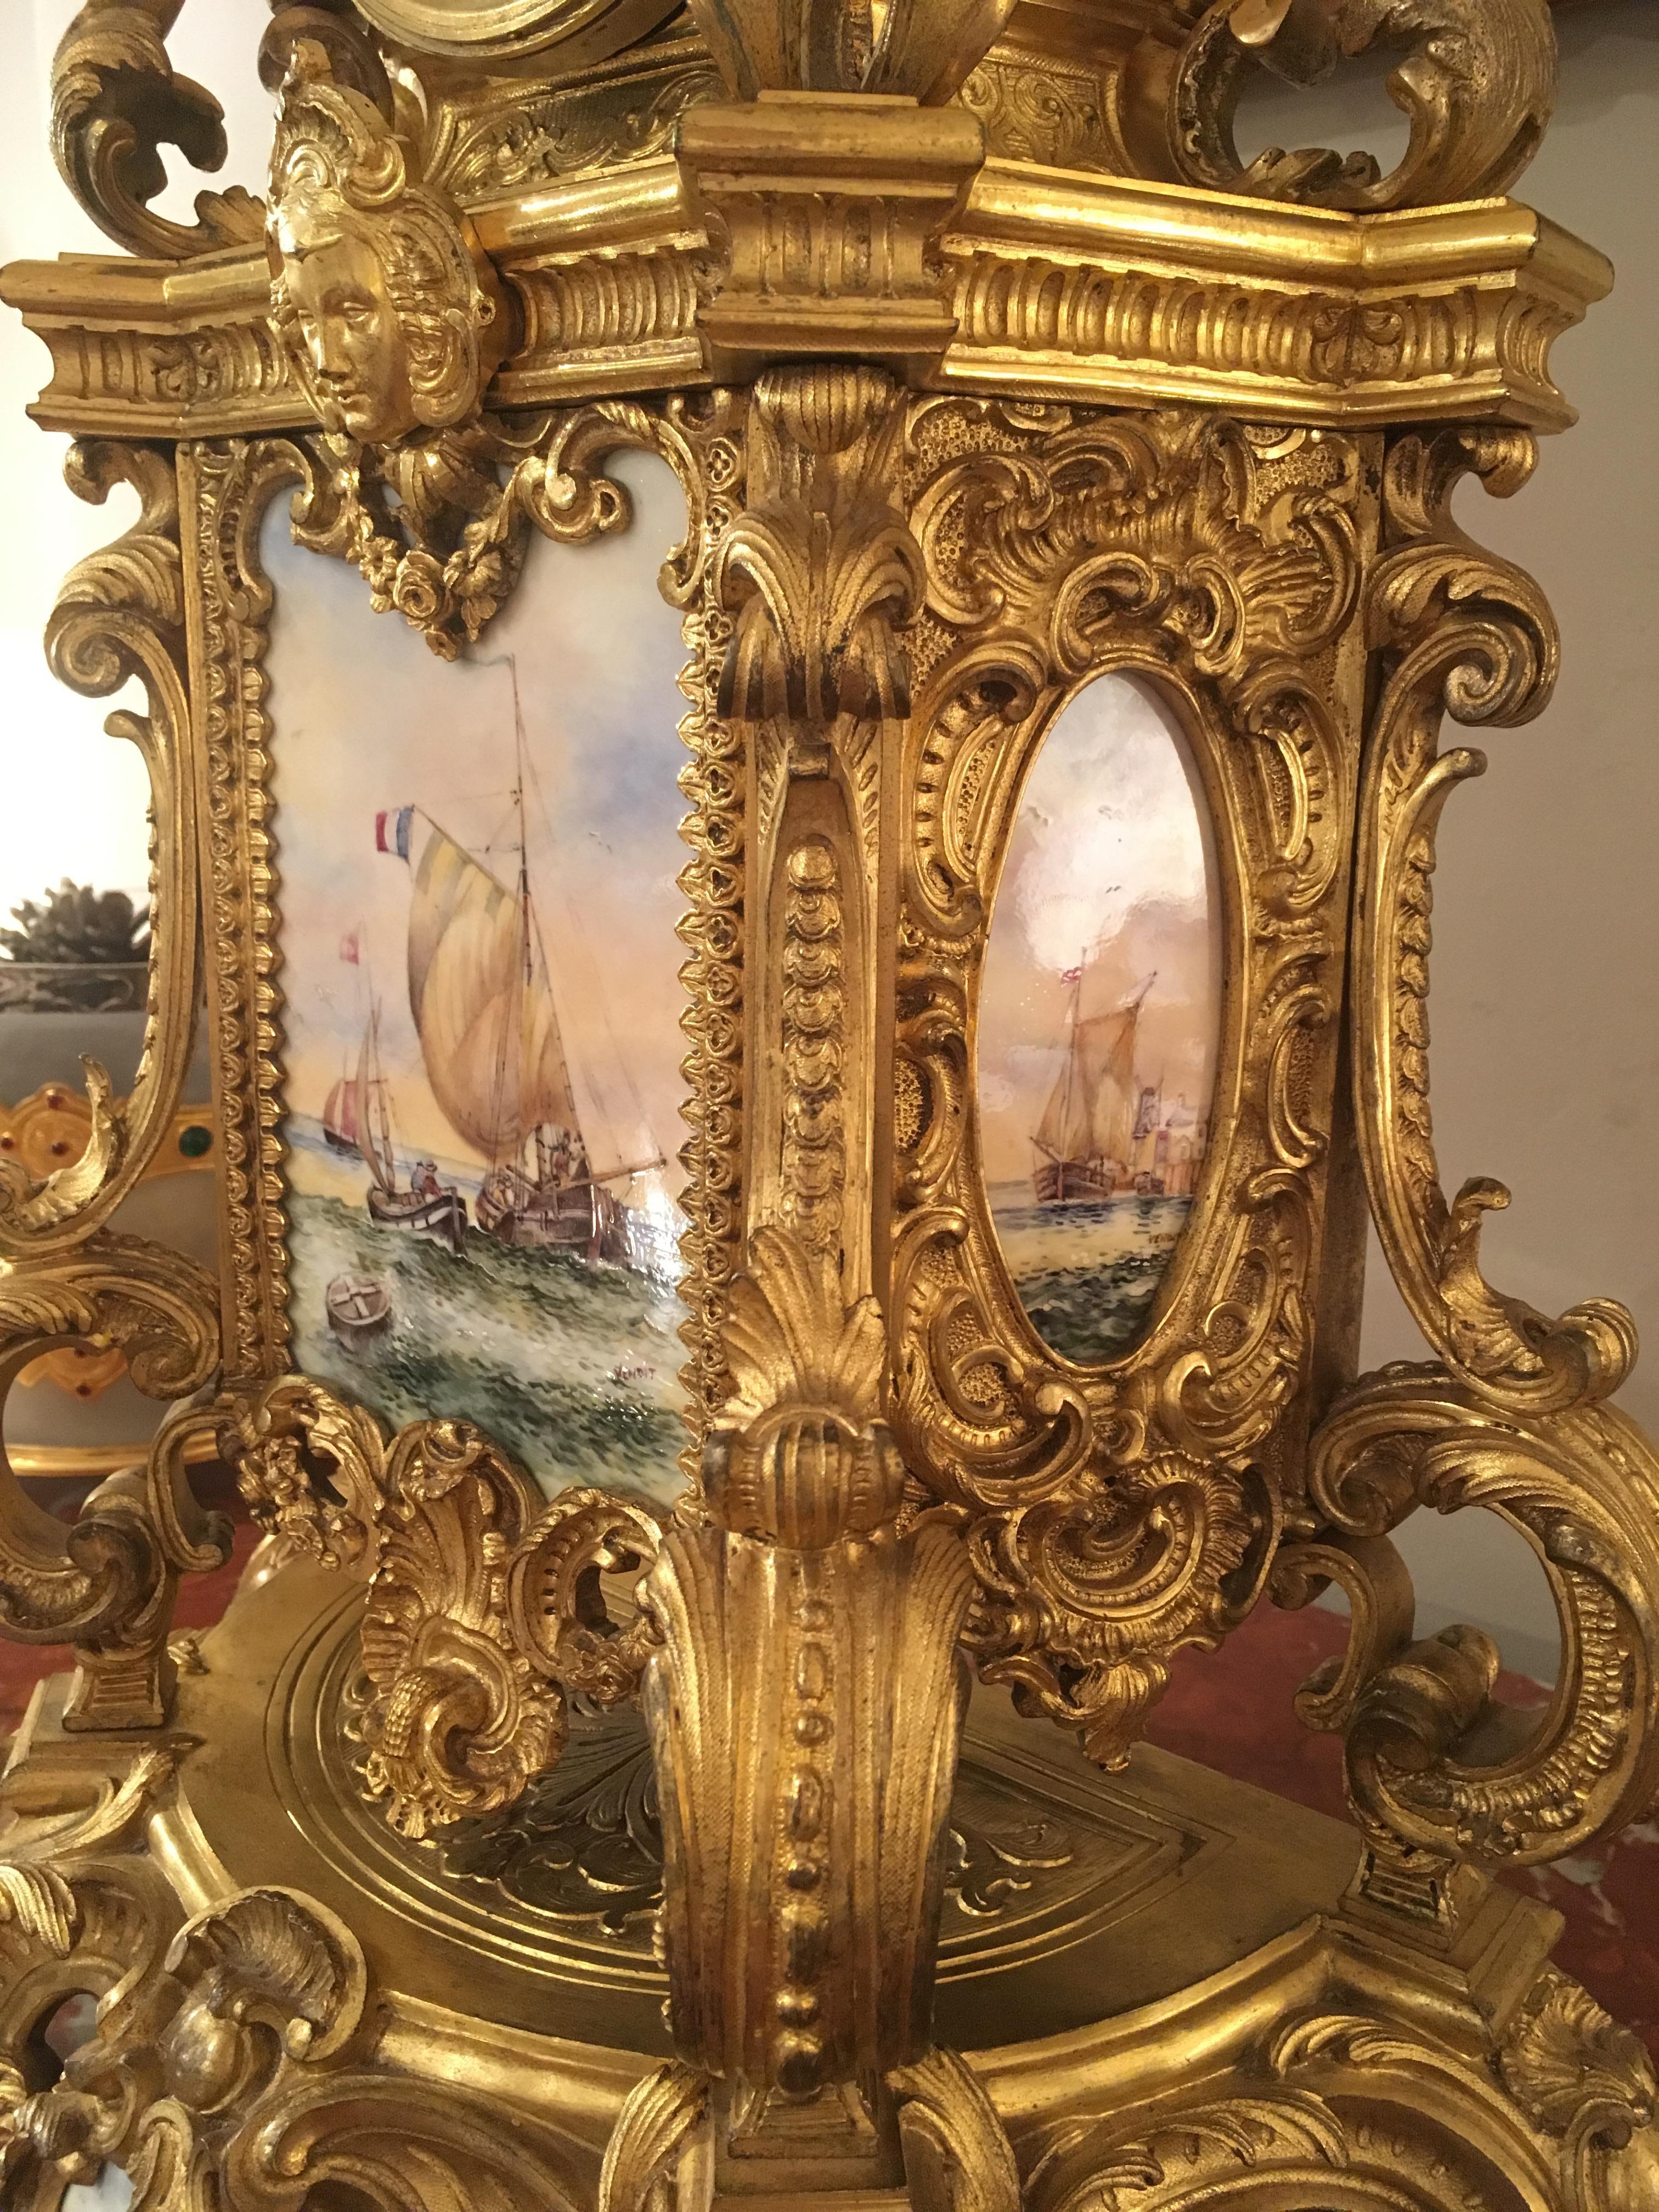 French 19th Century Gilt Bronze Mantle Clock with Nautical Scenes For Sale 1